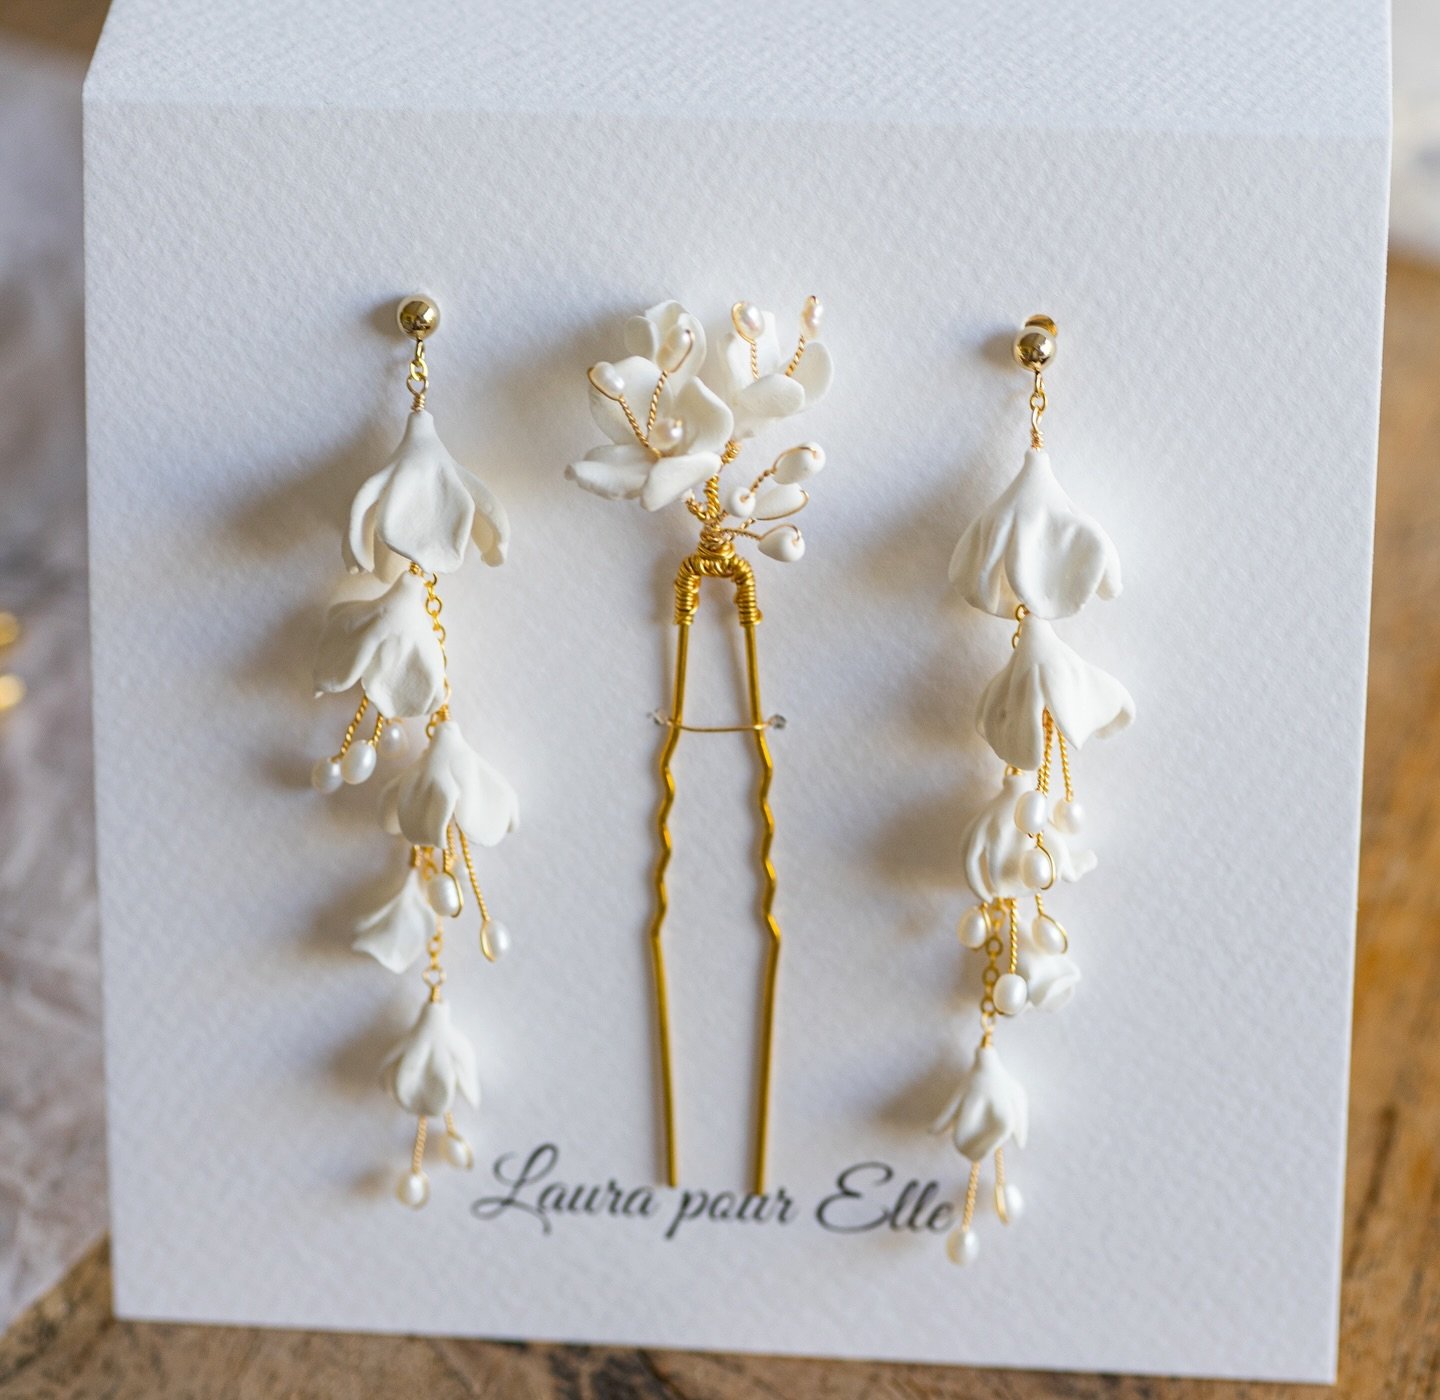 Our 𝑩𝒆𝒍𝒈𝒓𝒂𝒗𝒊𝒂 earrings paired with a delicate floral pin, a subtle detail that will make the difference adding balance and that touch of sophistication to your hairstyle! 

#laurapourelle #bouclesdoreilles #boucles #bridalearrings #accessoir